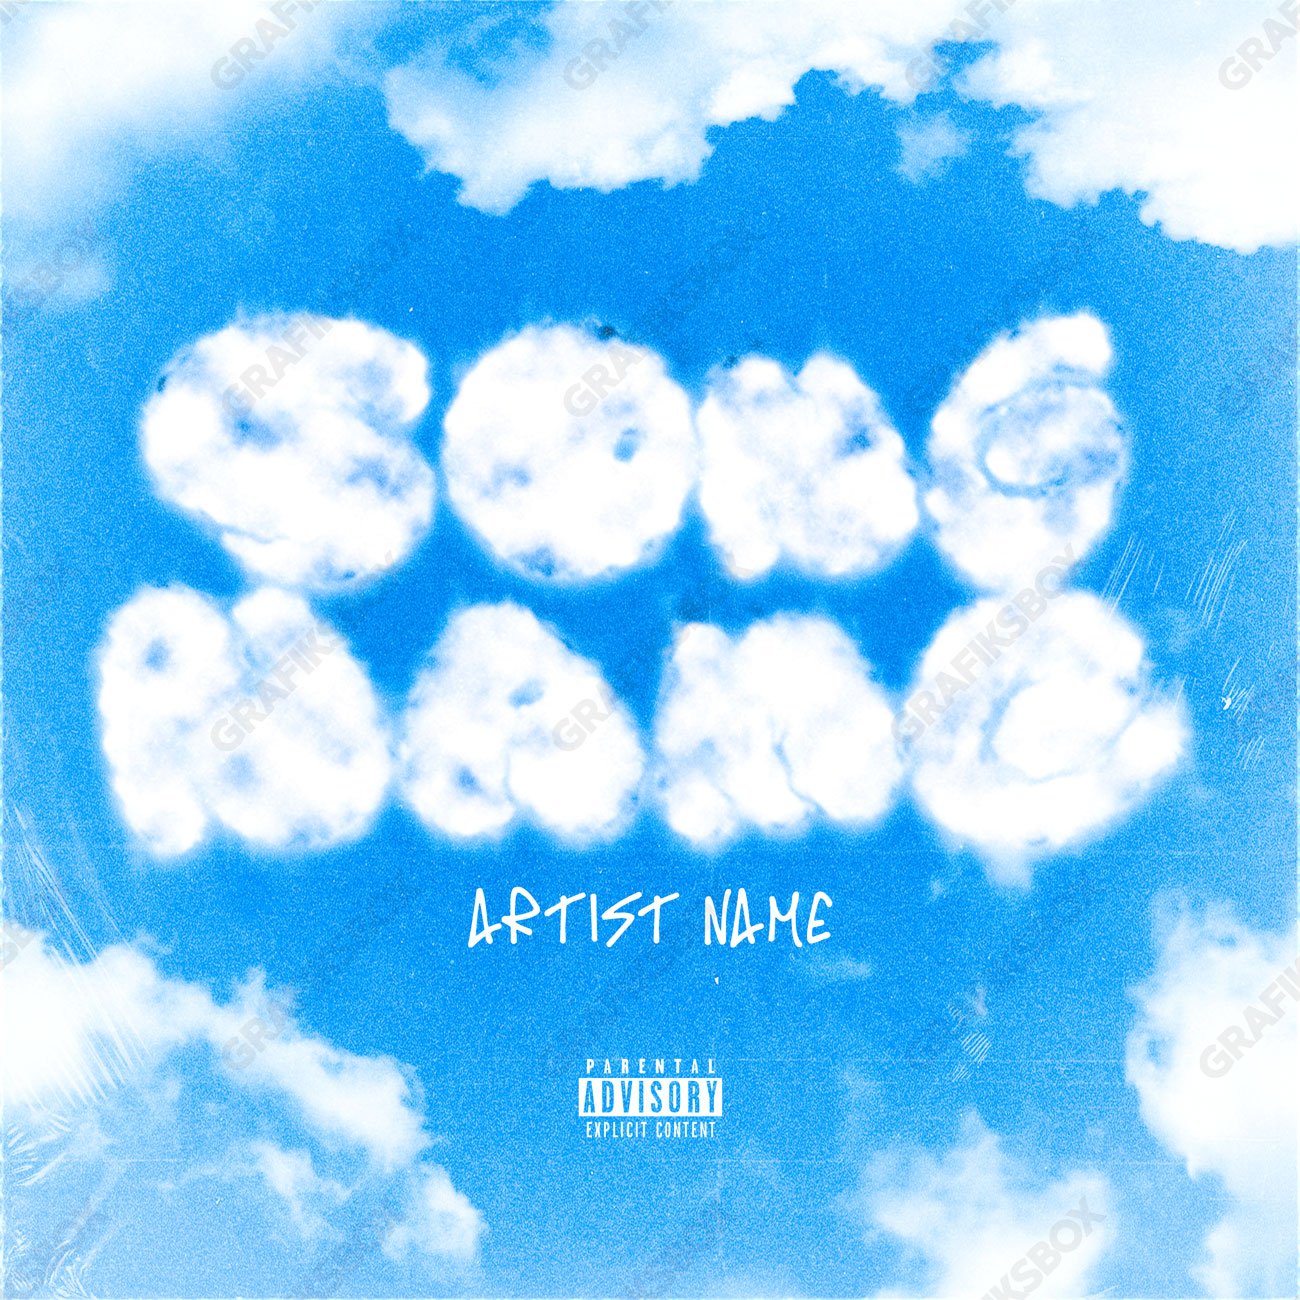 Up There premade cover art